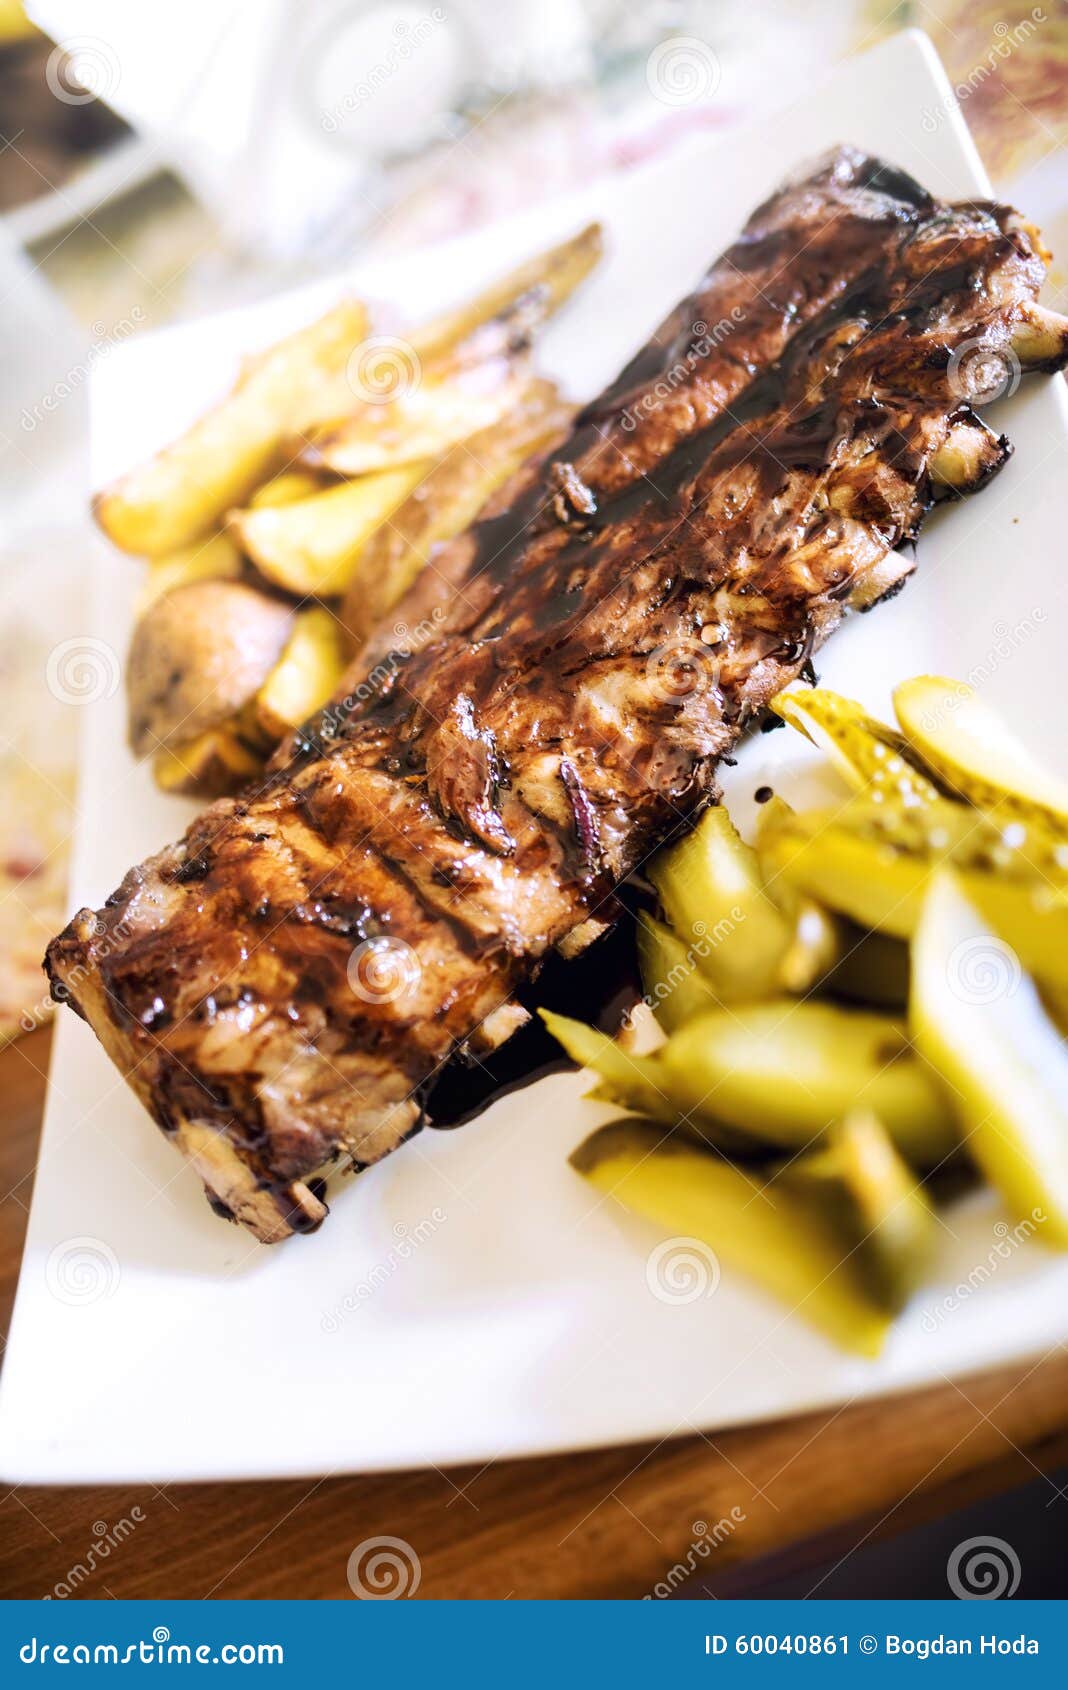 Pork Spare Ribs With Barbecue Sauce, Golden Potatoes And Pickles. Main ...